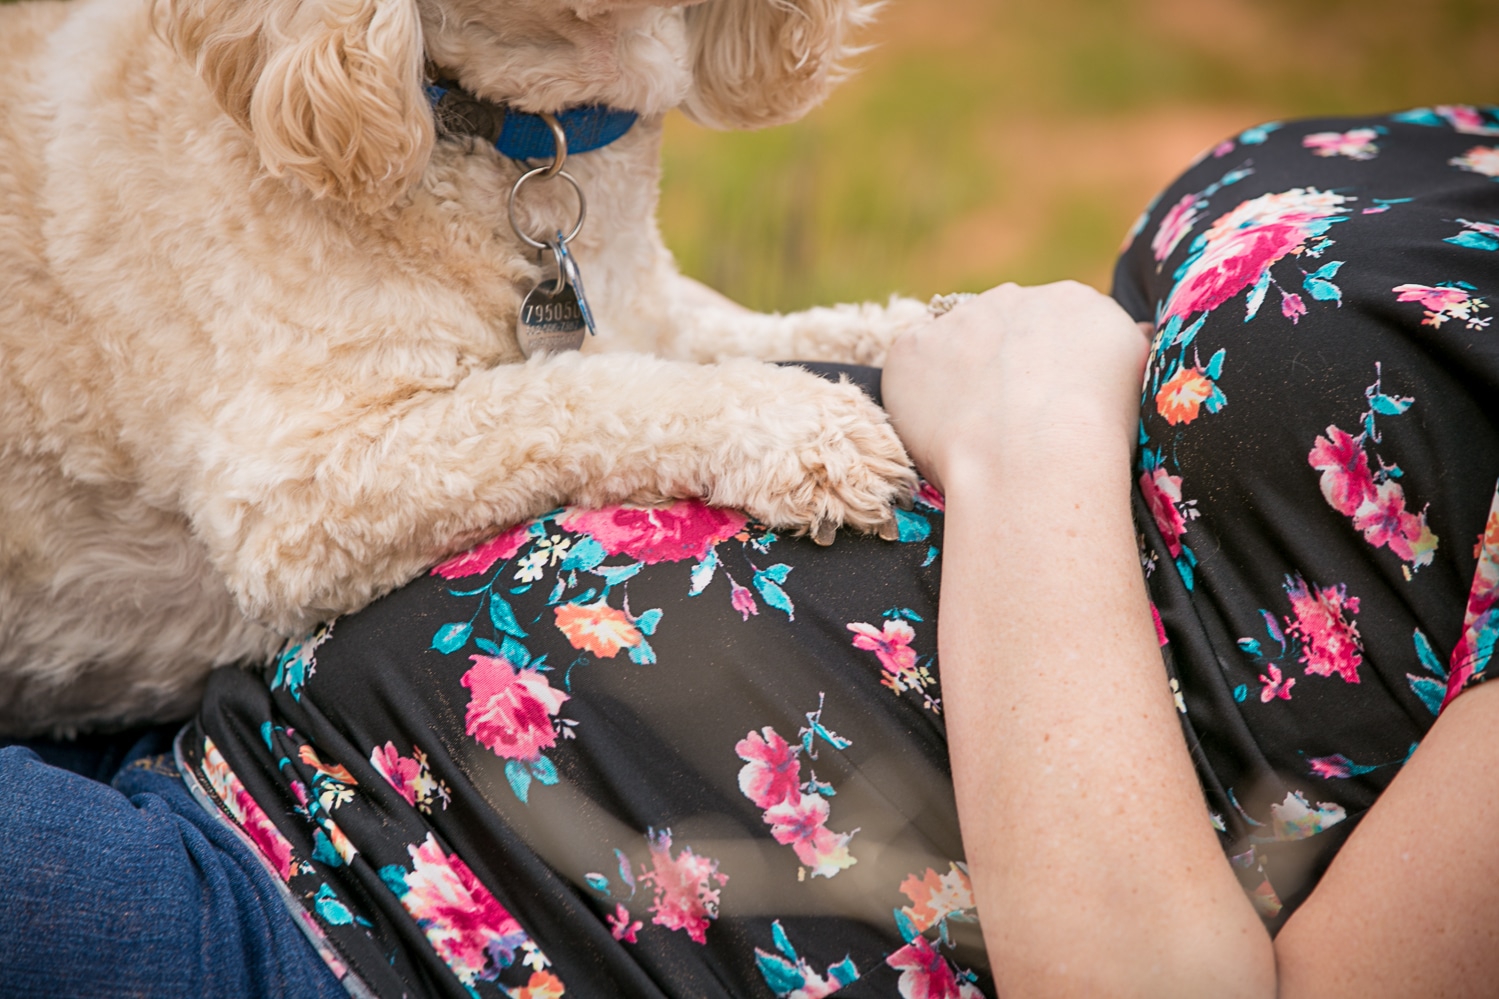 maternity dog photography, dog on his moms belly